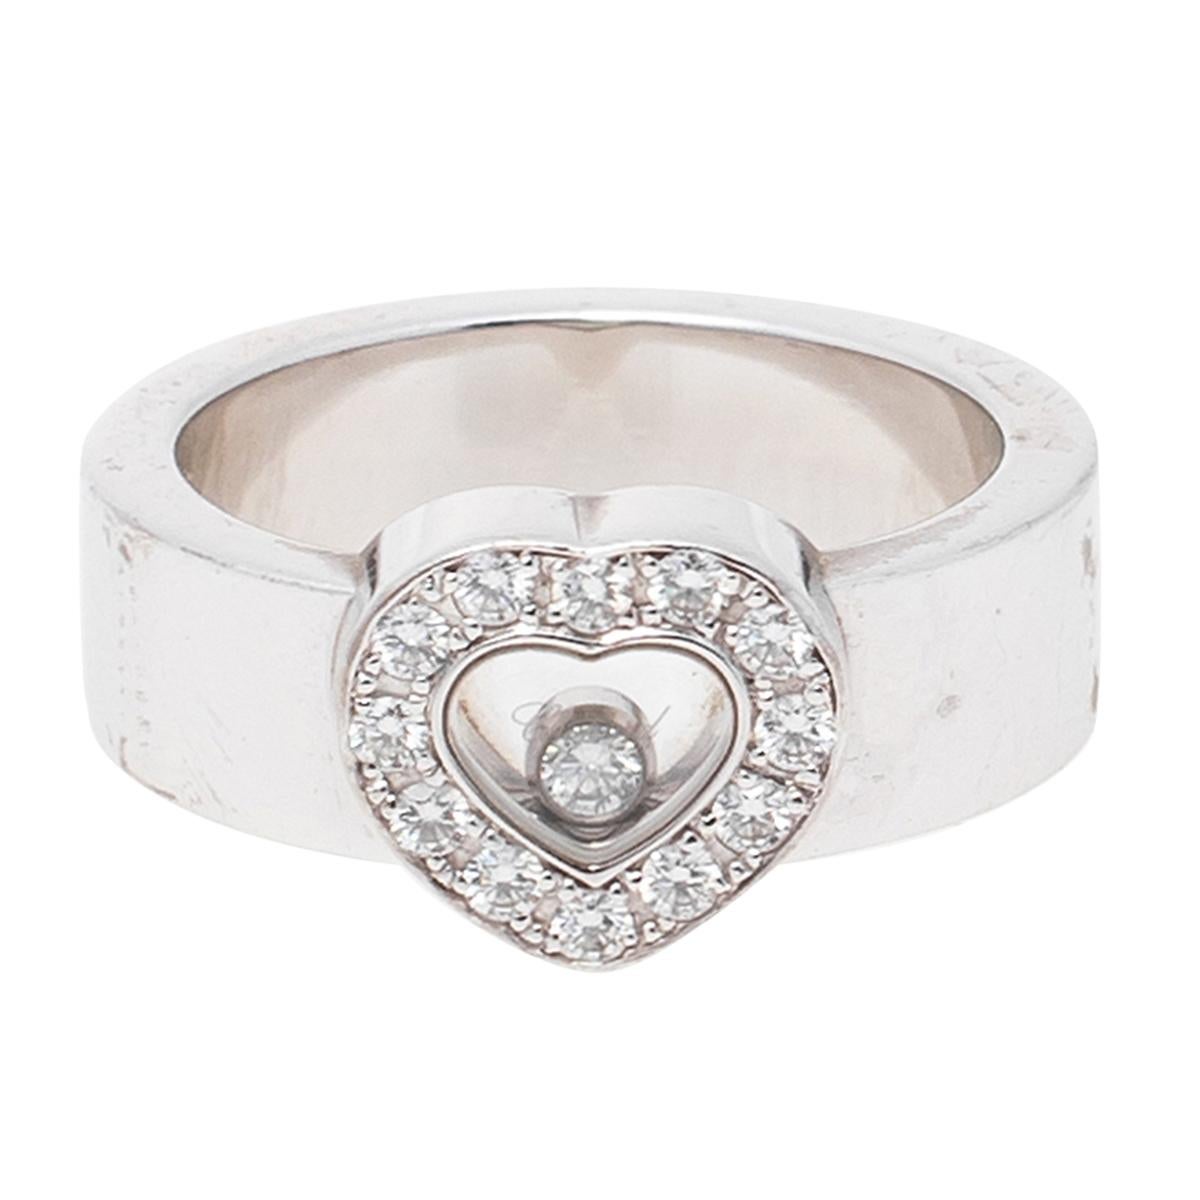 This ring in 18k white gold is a precious addition from the Happy Diamond collection. A beautiful heart at the front encases a single Chopard moving diamond that dances playfully, a signature of the brand. Detailed with more diamonds on the